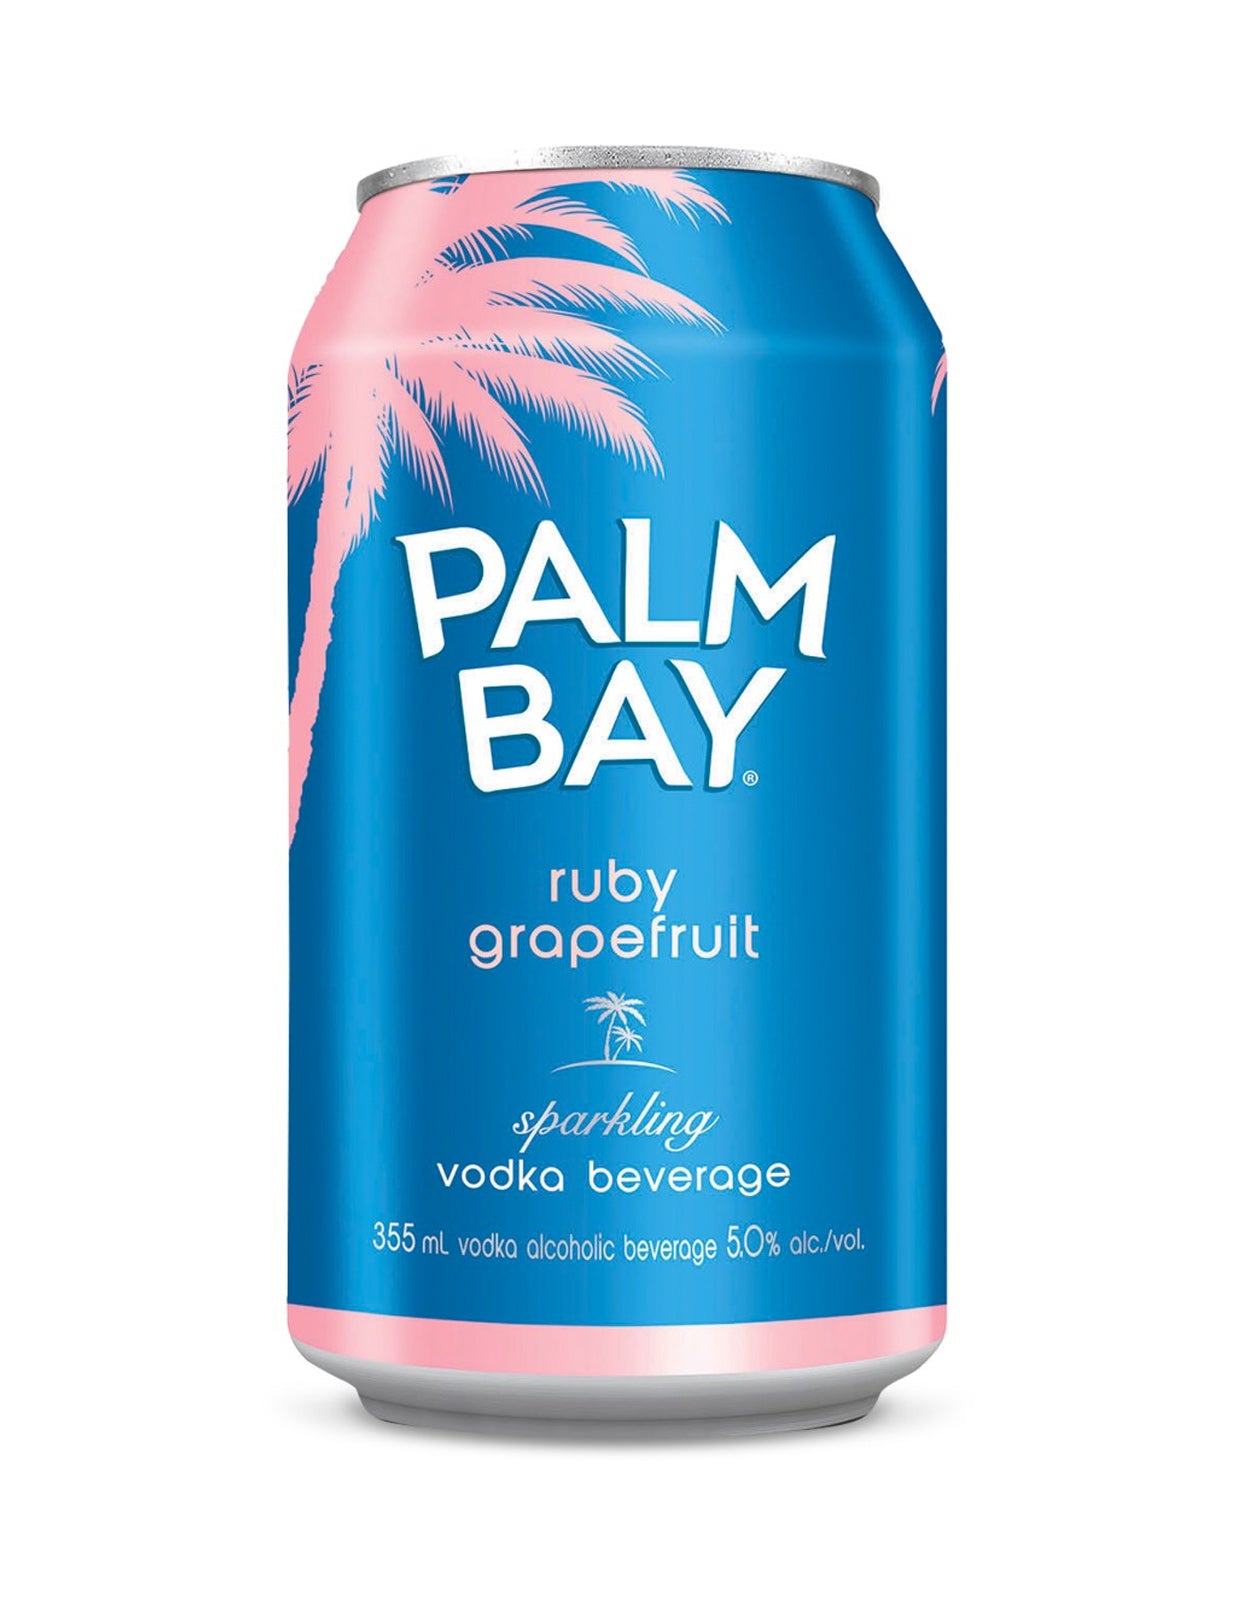 Palm Bay Ruby Grapefruit 355 ml - 24 Cans